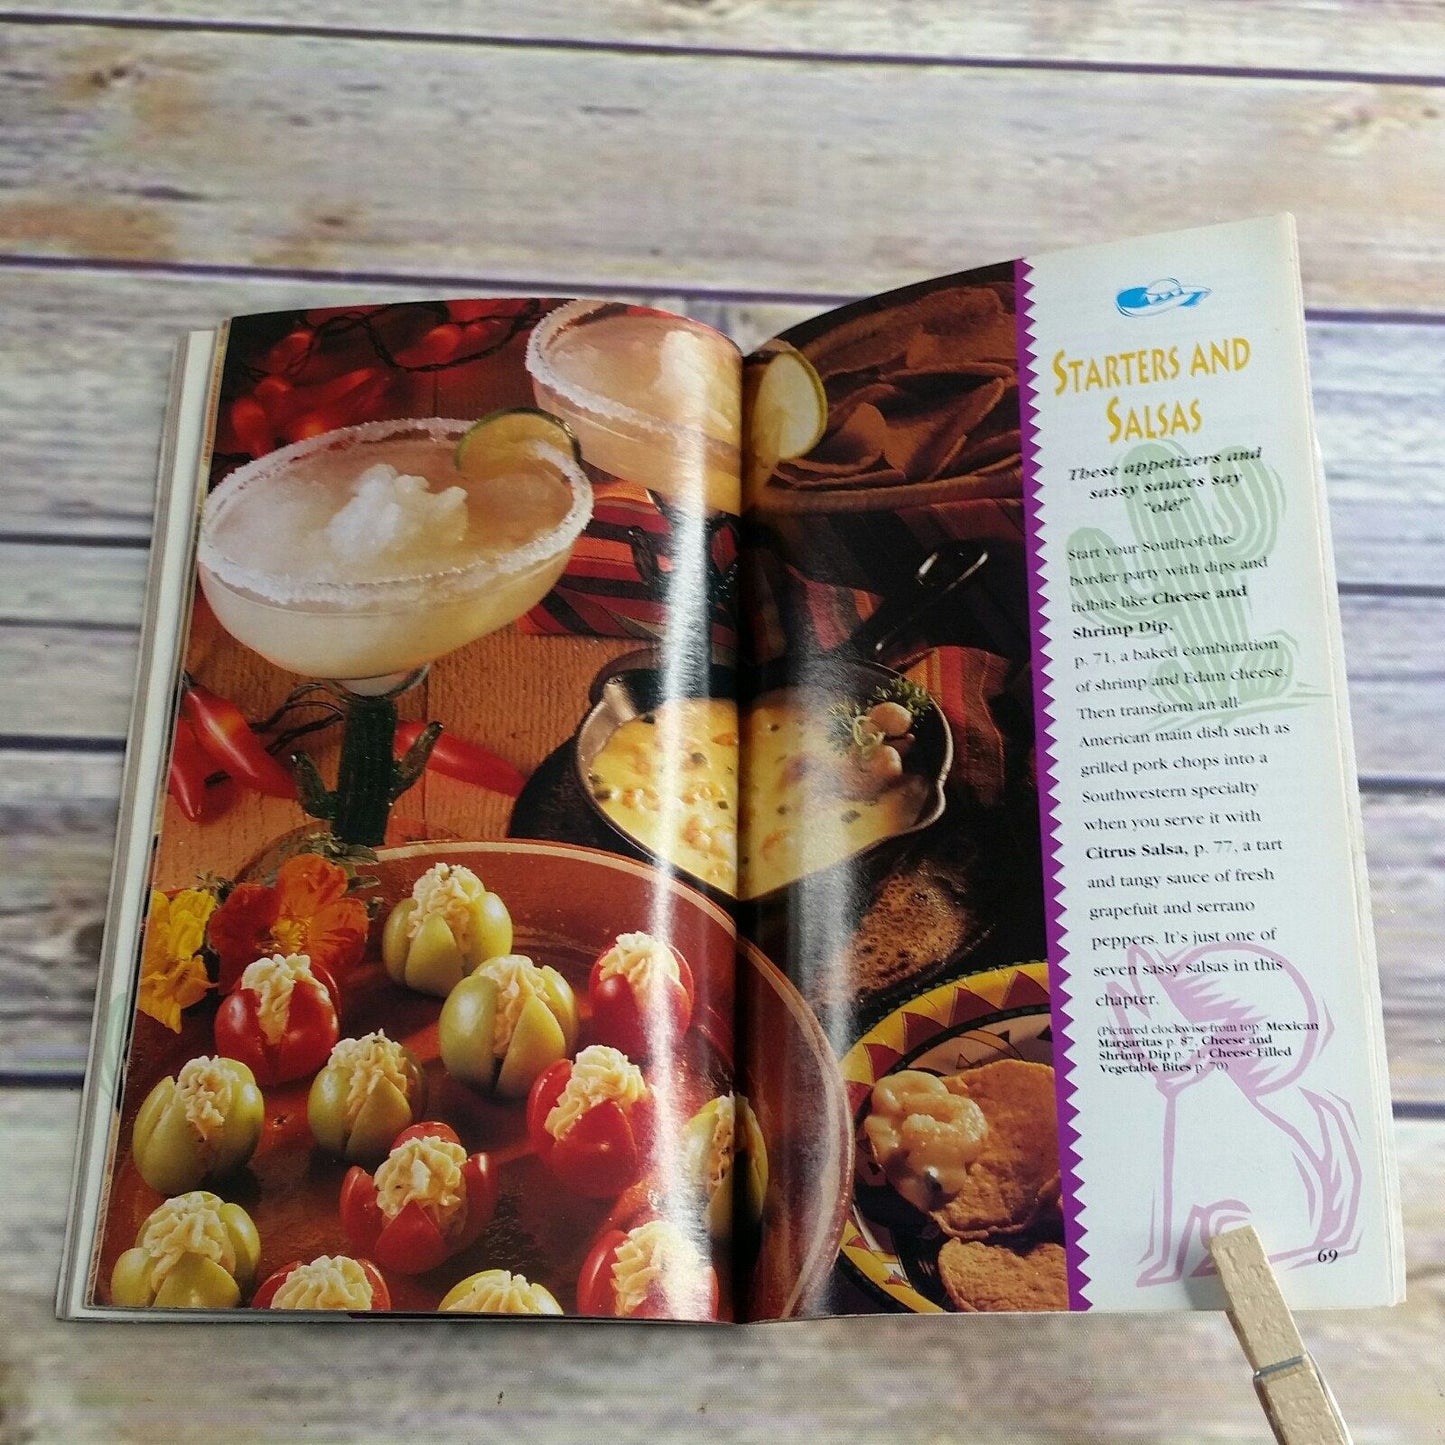 Vintage Pillsbury Mexican Cooking Pamphlet Cookbook 1995 Menus Recipes Paperback Booklet Grocery Store Classic Cookbooks